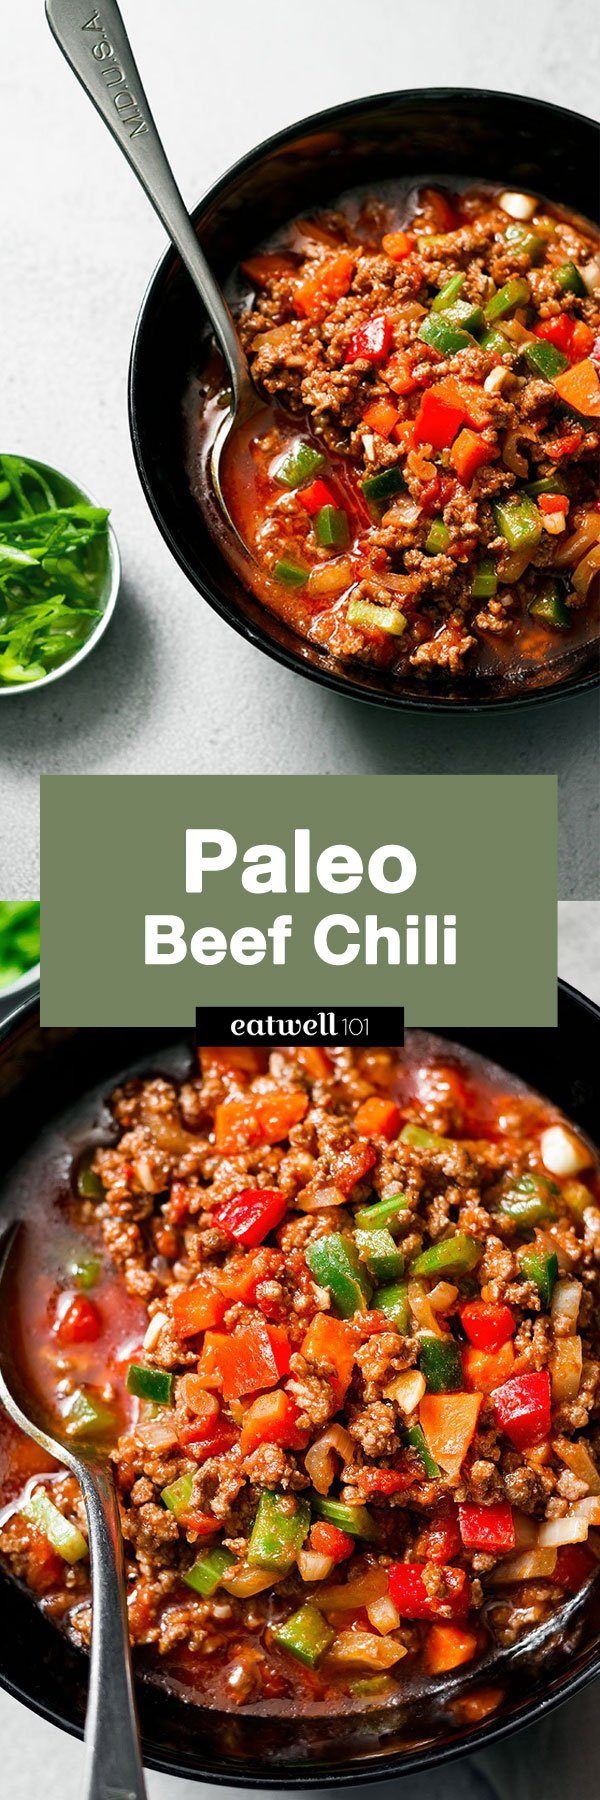 The best beef chili recipe - #beef #chili #recipe #eatwell101 - Full of ground beef, veggies and seasoning, this paleo chili is so comforting for a cold and rainy night!